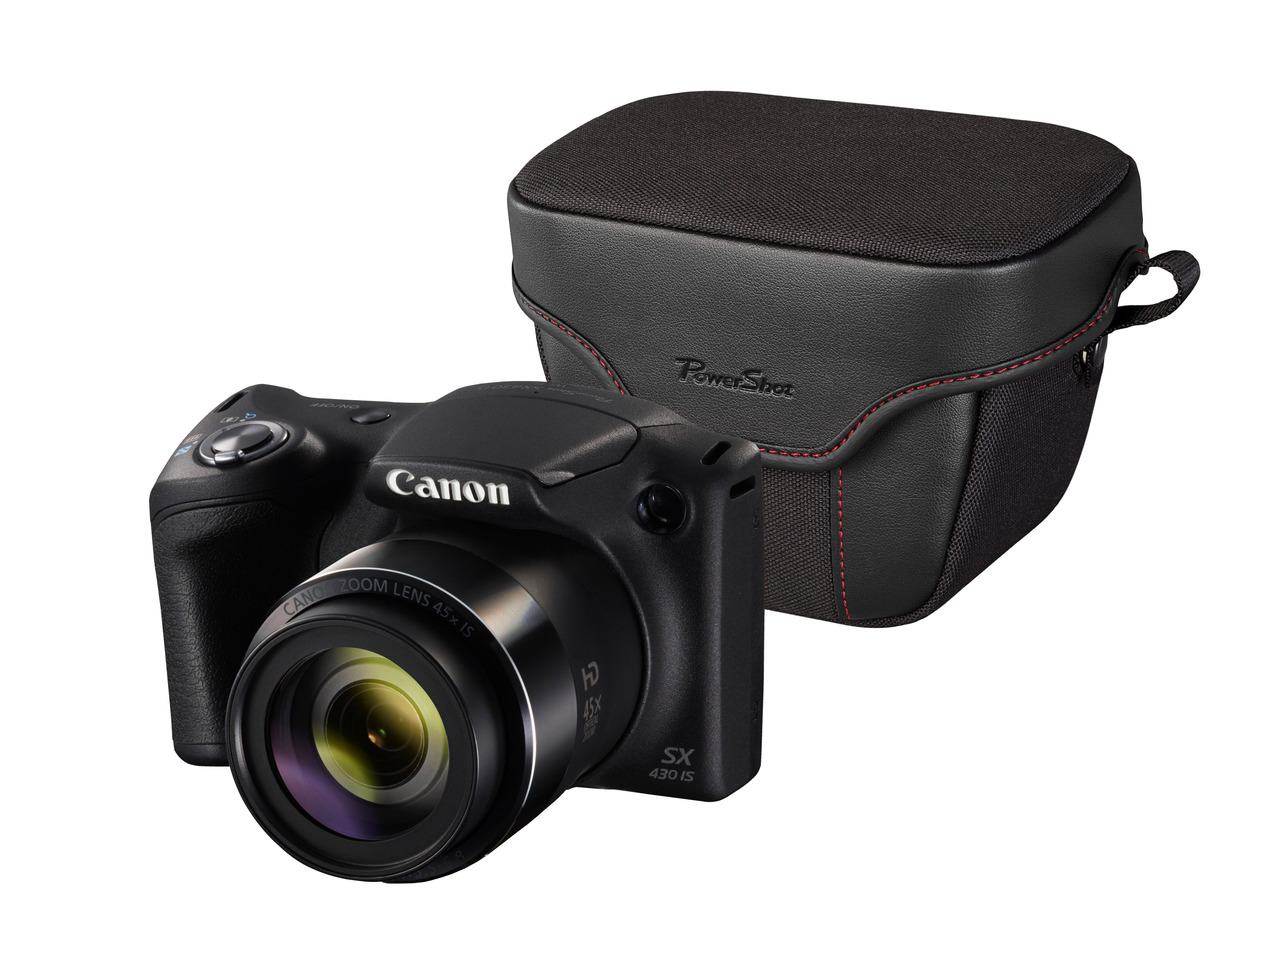 CANON(R) PowerShot SX430 IS With Case